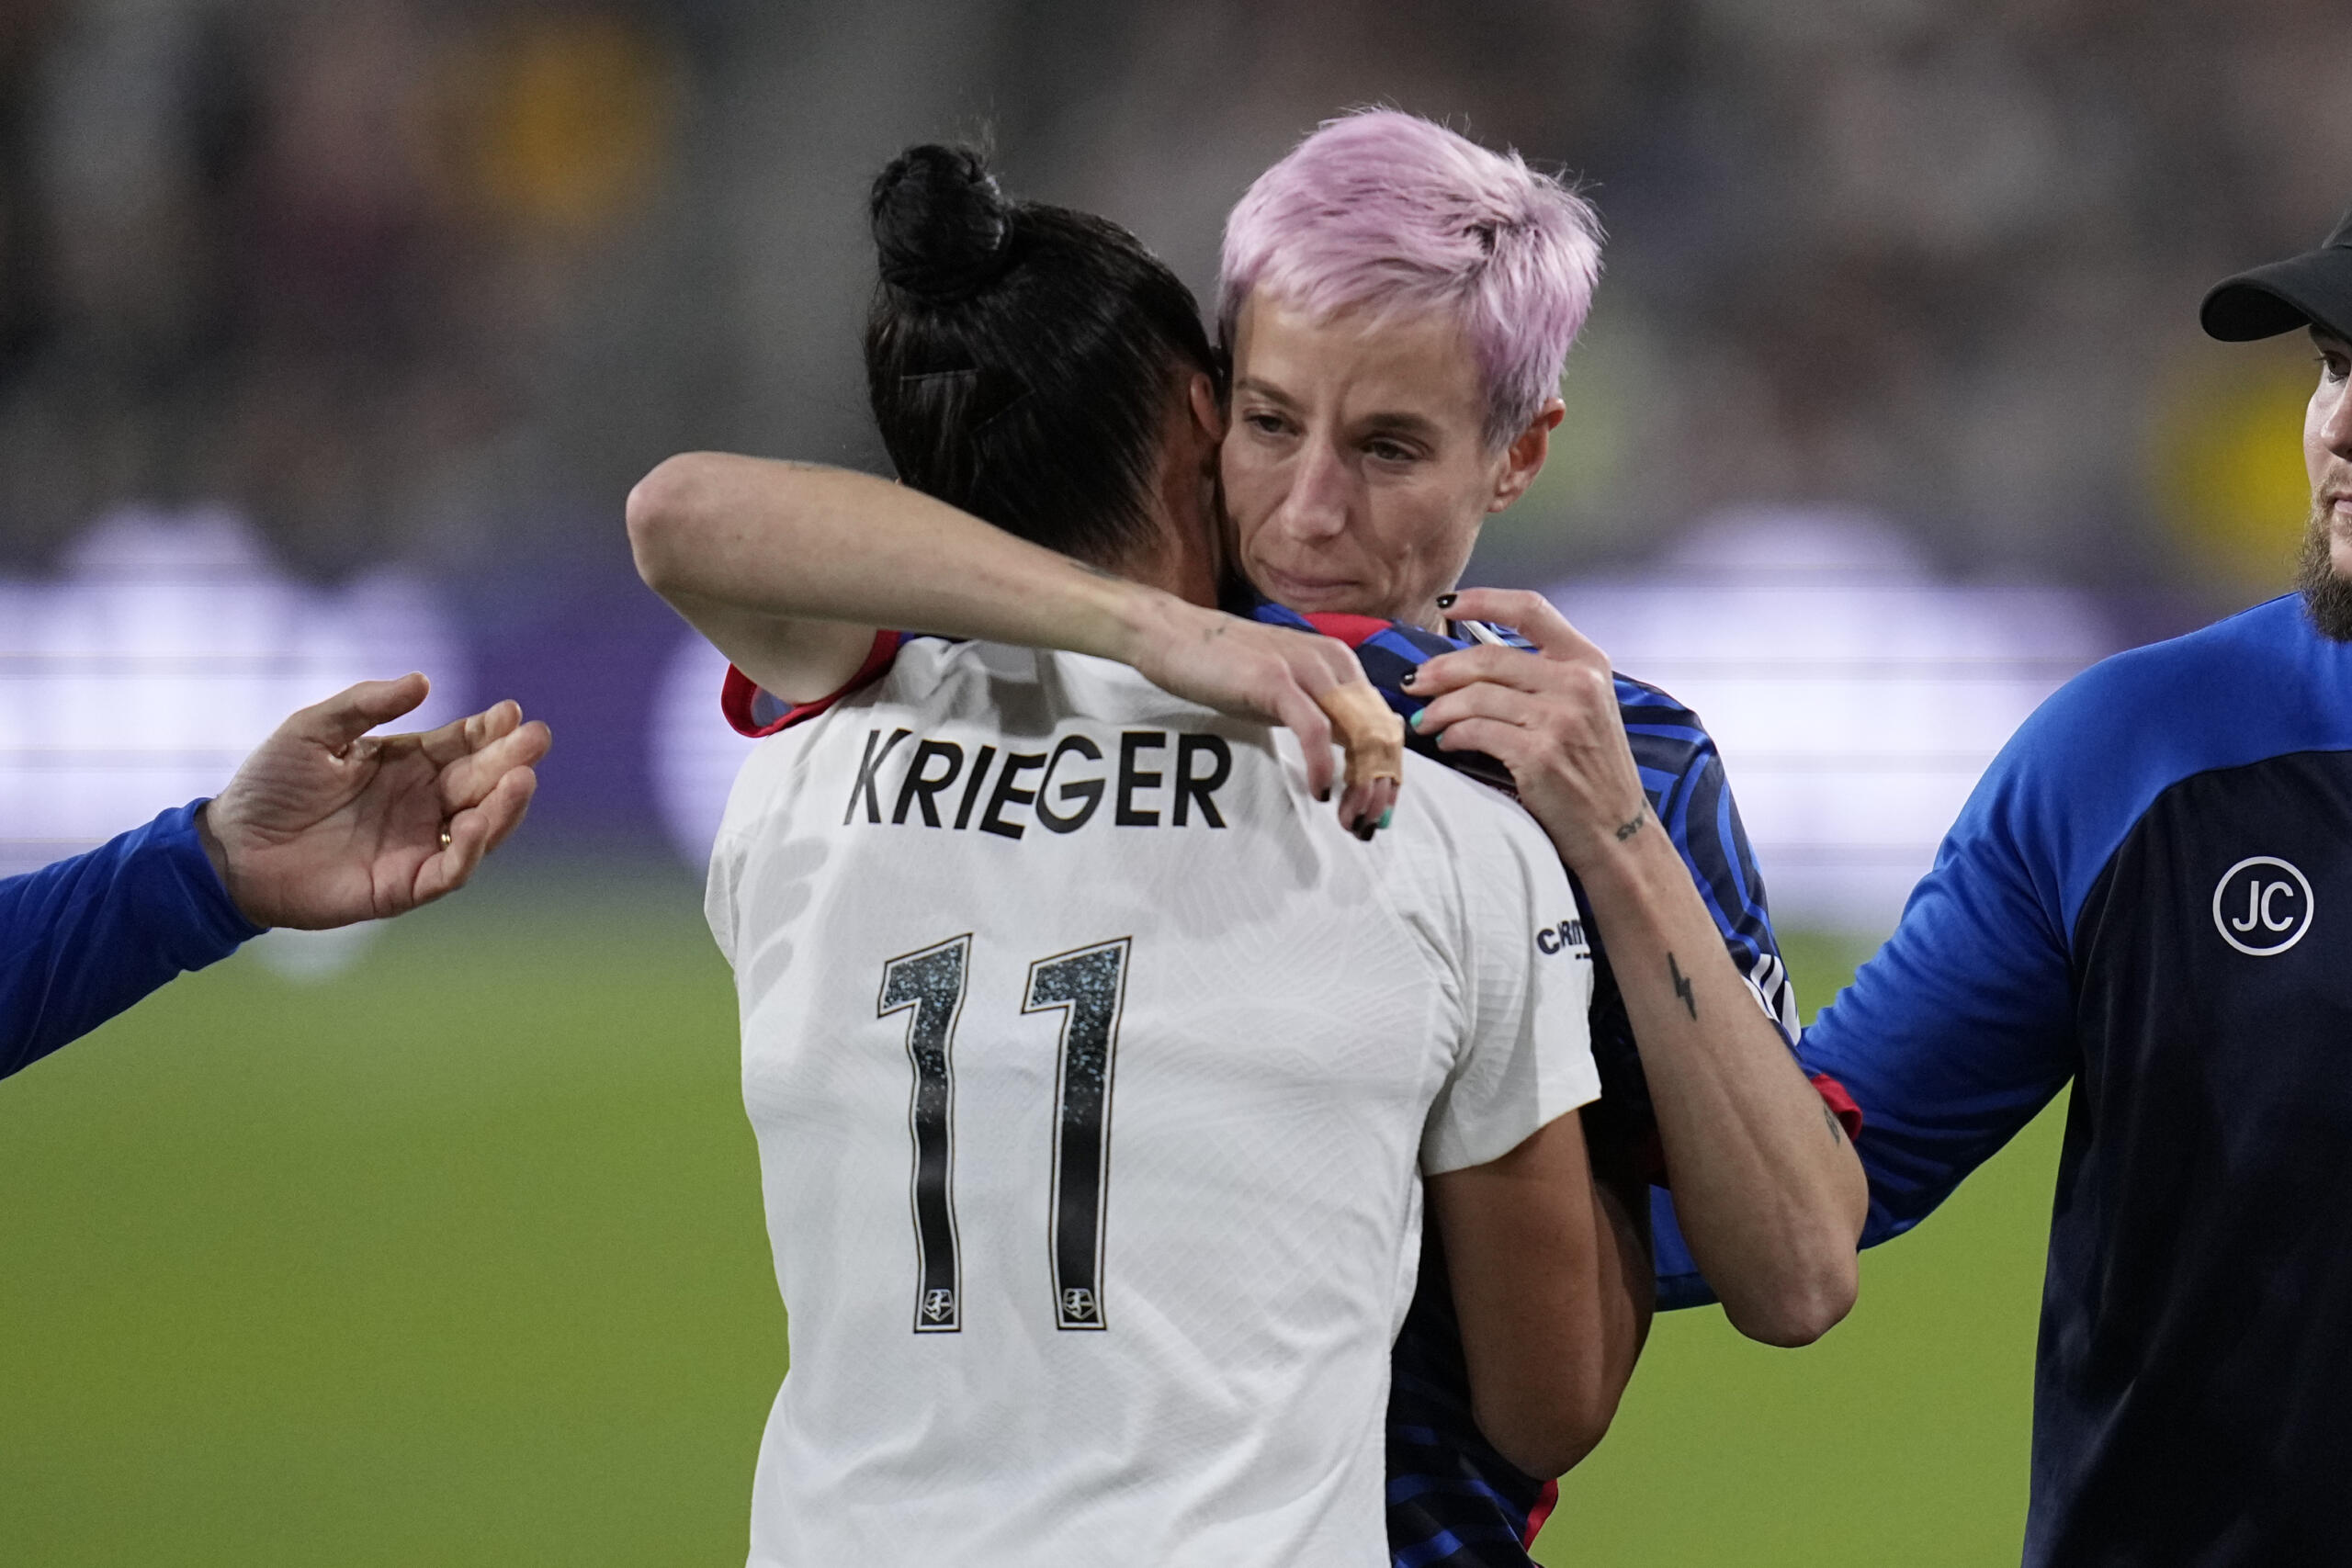 OL Reign forward Megan Rapinoe, right, embraces NJ/NY Gotham defender Ali Krieger as Rapinoe comes off the field after an injury during the first half of the NWSL Championship soccer game, Saturday, Nov. 11, 2023, in San Diego.